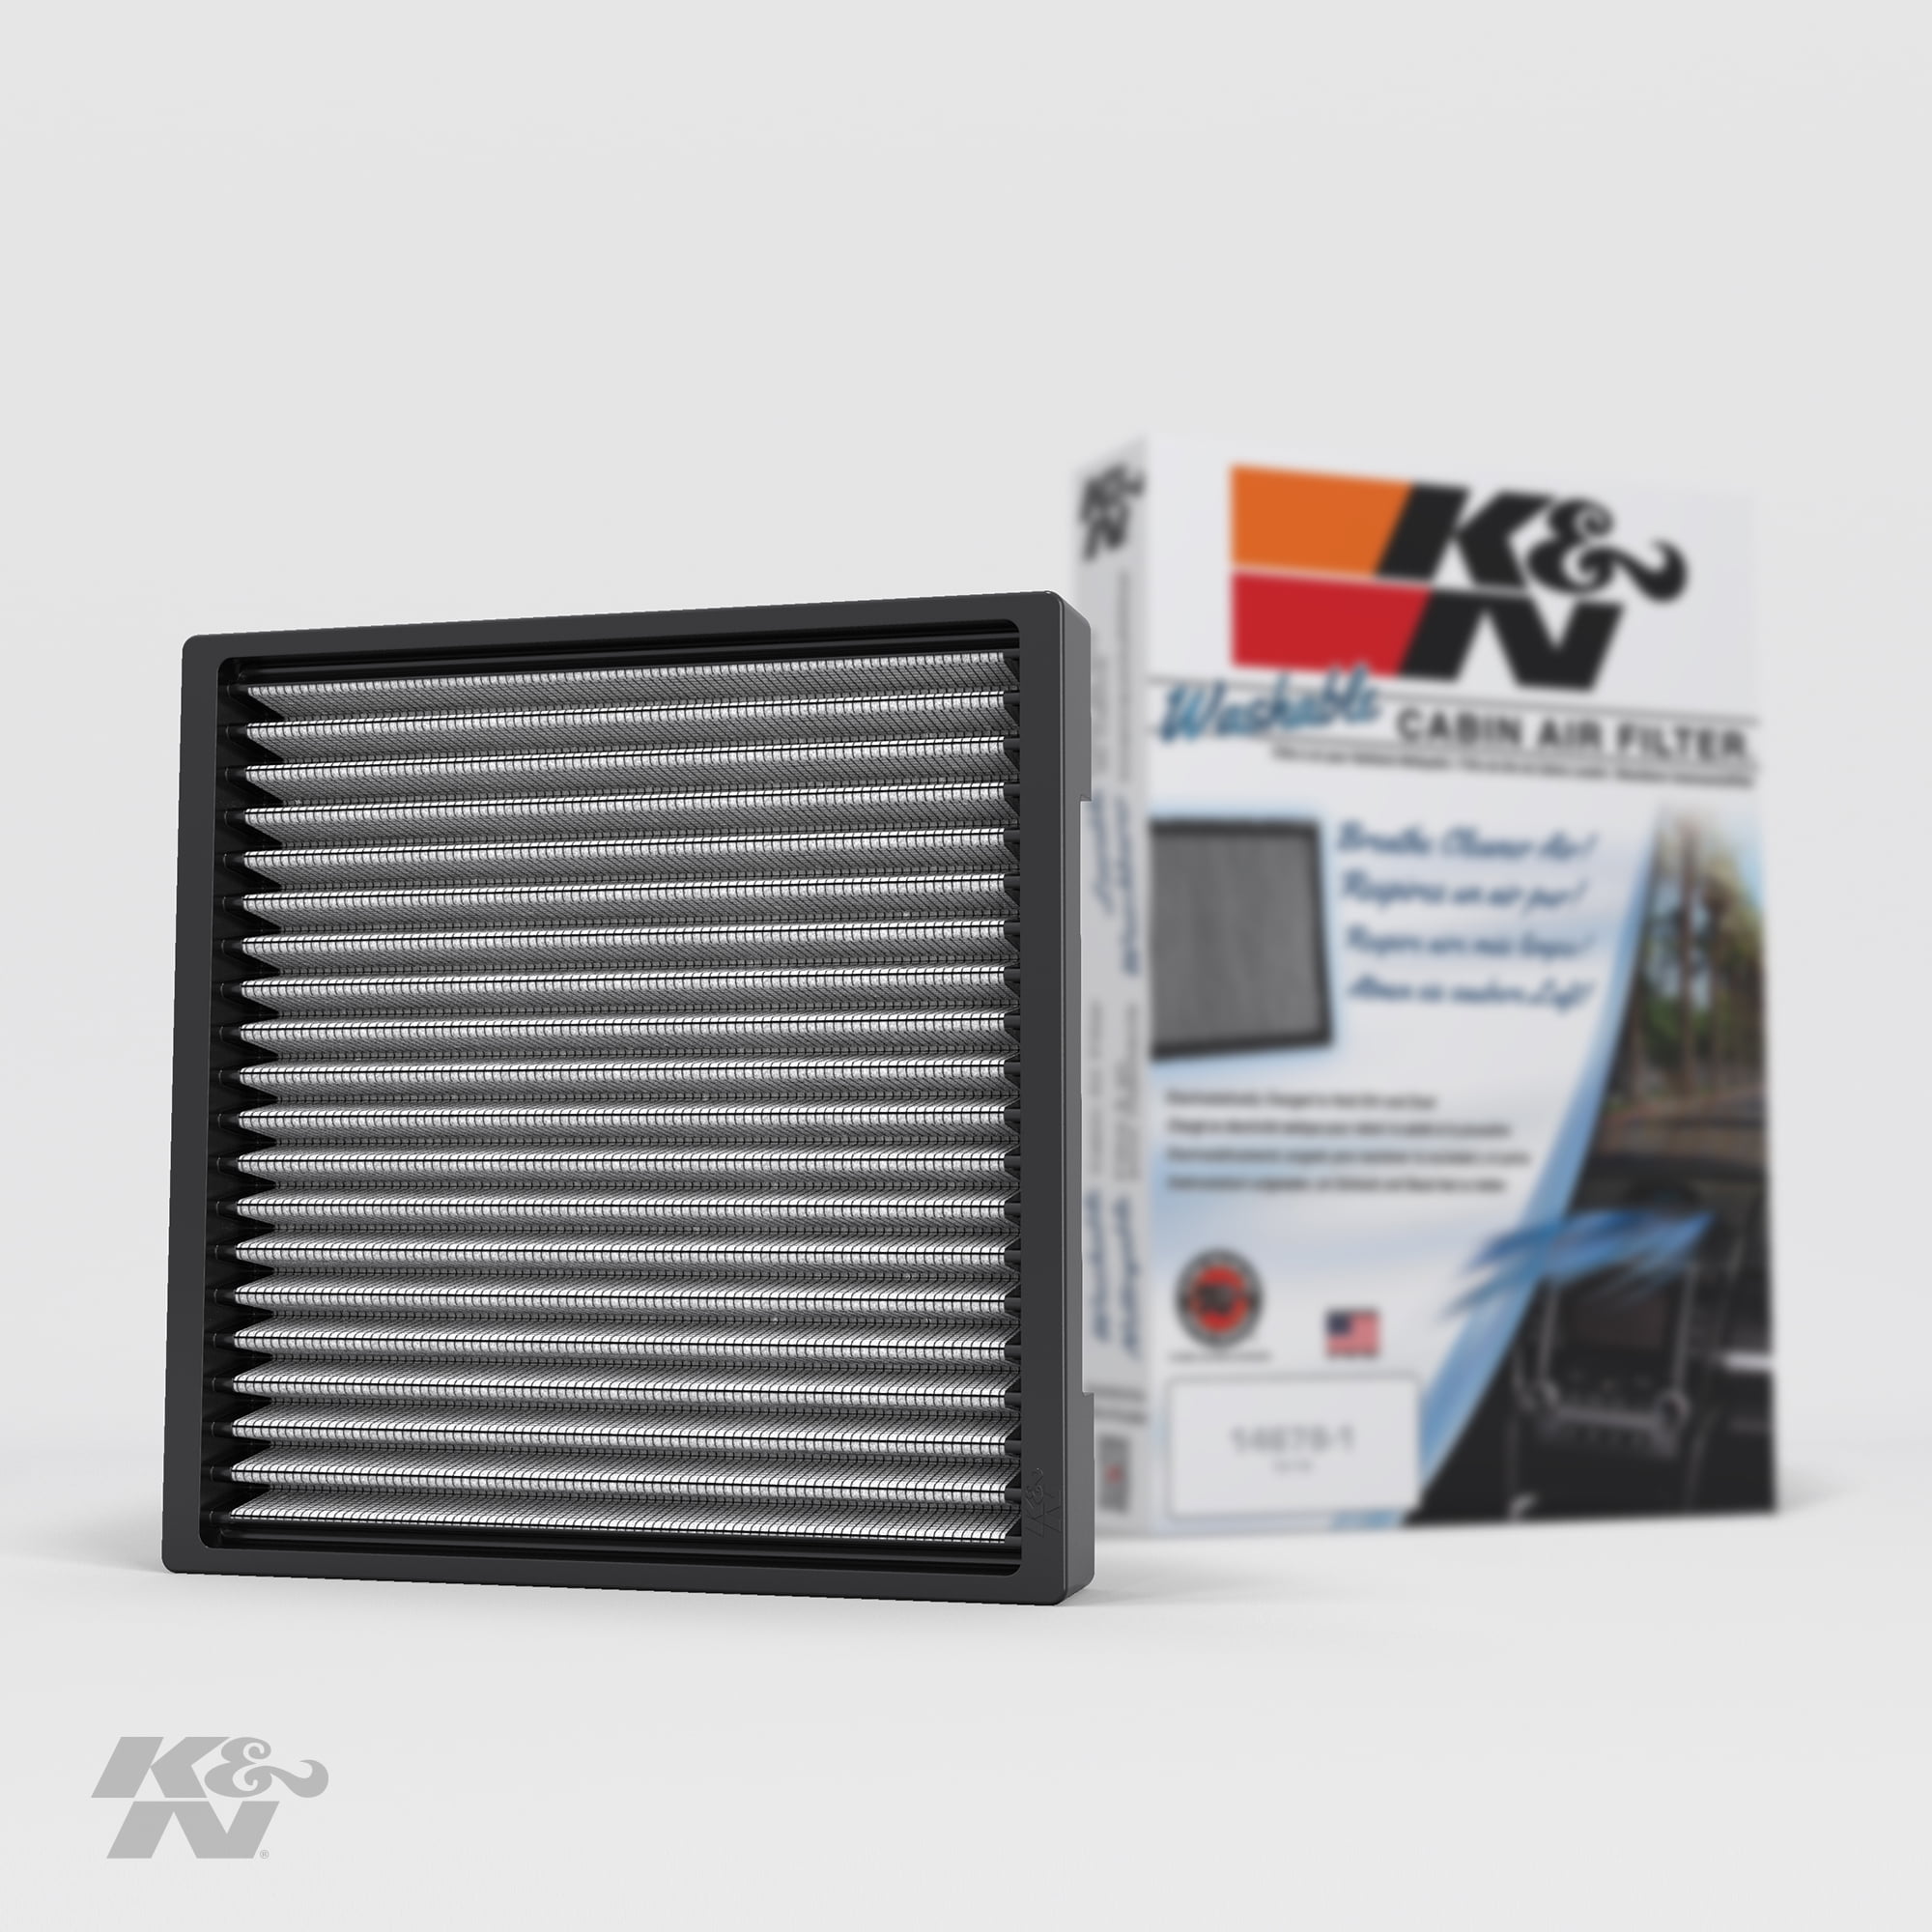 K&N Cabin Air Filter: Washable and Reusable: Designed For Select 2008-2019 Honda (Civic, City Cabin Air Filter For 2019 Honda Odyssey